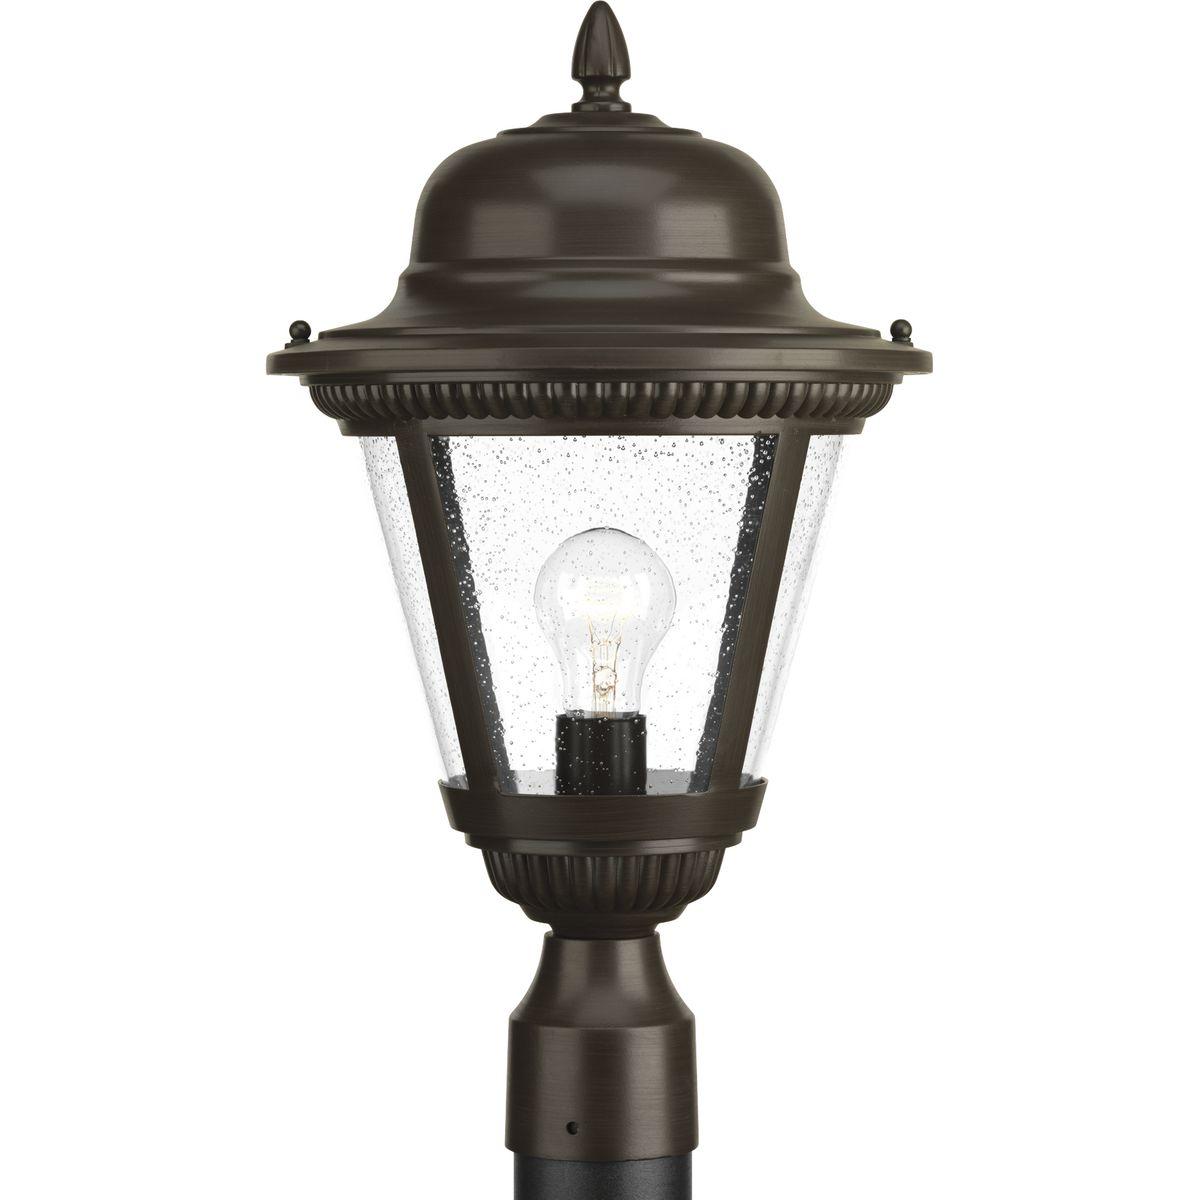 Hubbell P5458-20 Add a touch of rustic appeal and classic styling with beaded detailing in the Westport collection. Clear seeded glass compliments the durable powder coat finish in die-cast aluminum frames. One-light 11" post lantern. Antique Bronze finish.  ; Rustic appe